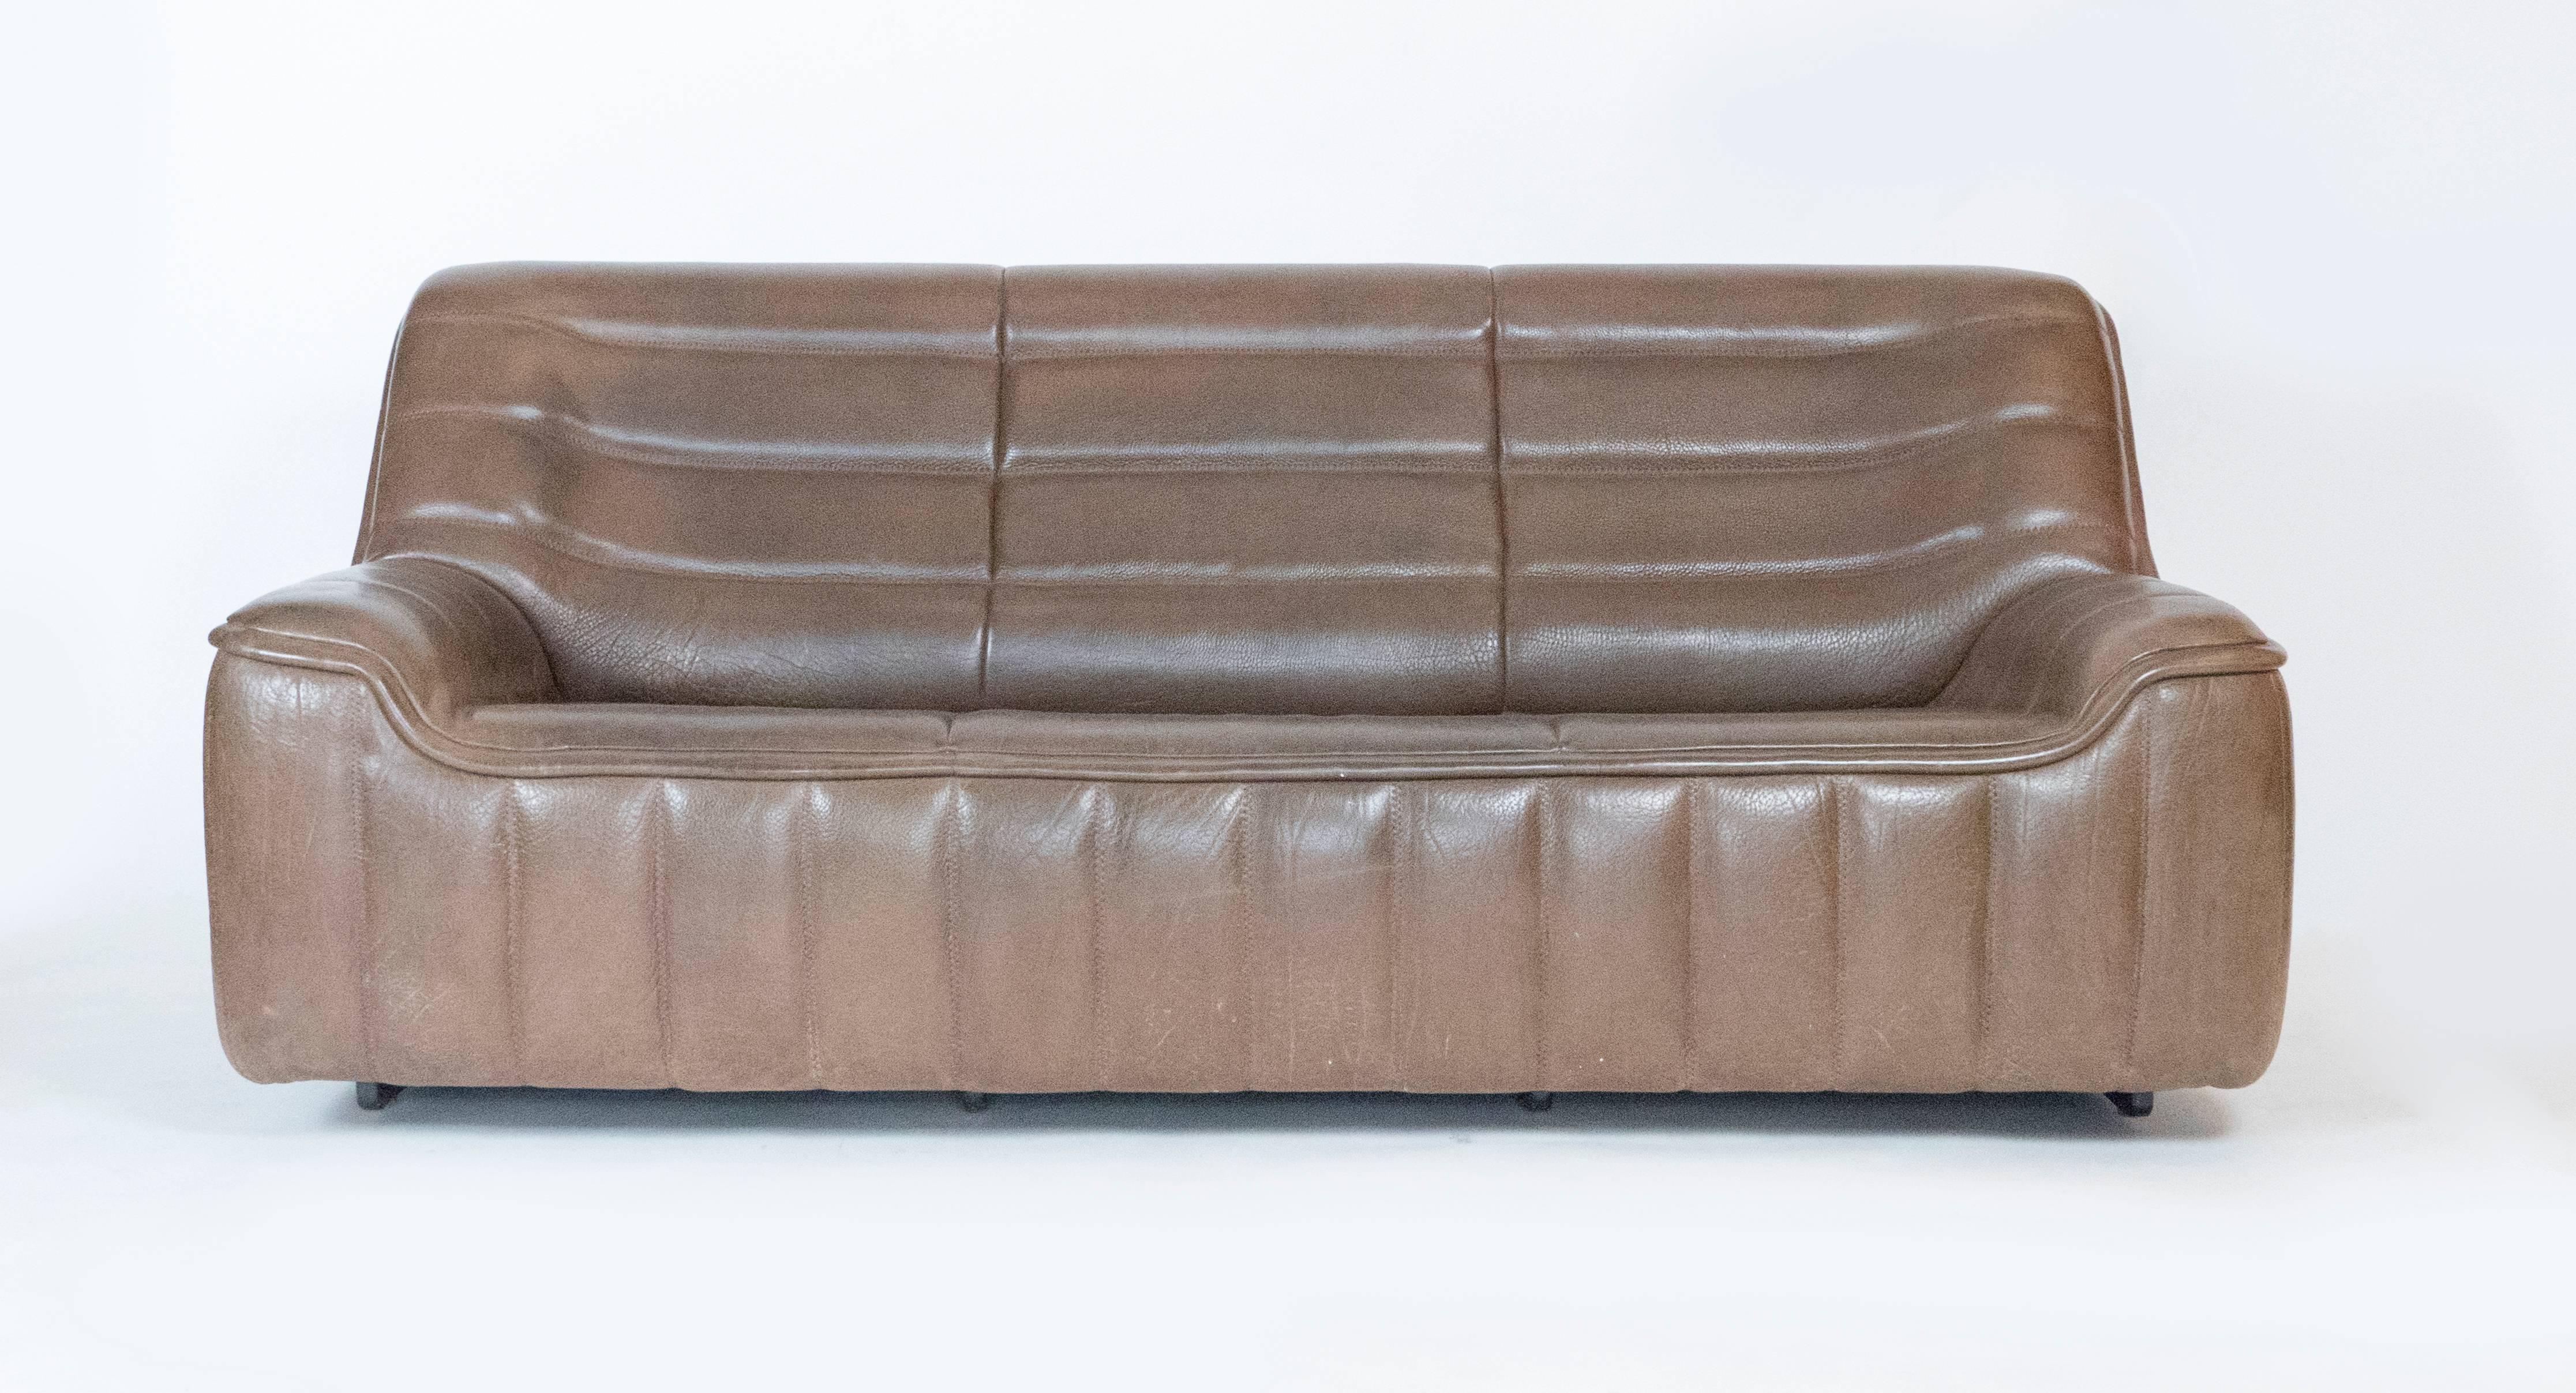 Three-seat leather sofa by De Sede. The couch is in perfect condition. It has a great patina. Very comfortable and rare to find a three-seat of this model.  This sofa is in our space in the Gallery @ 200 Lex. in  NYC.